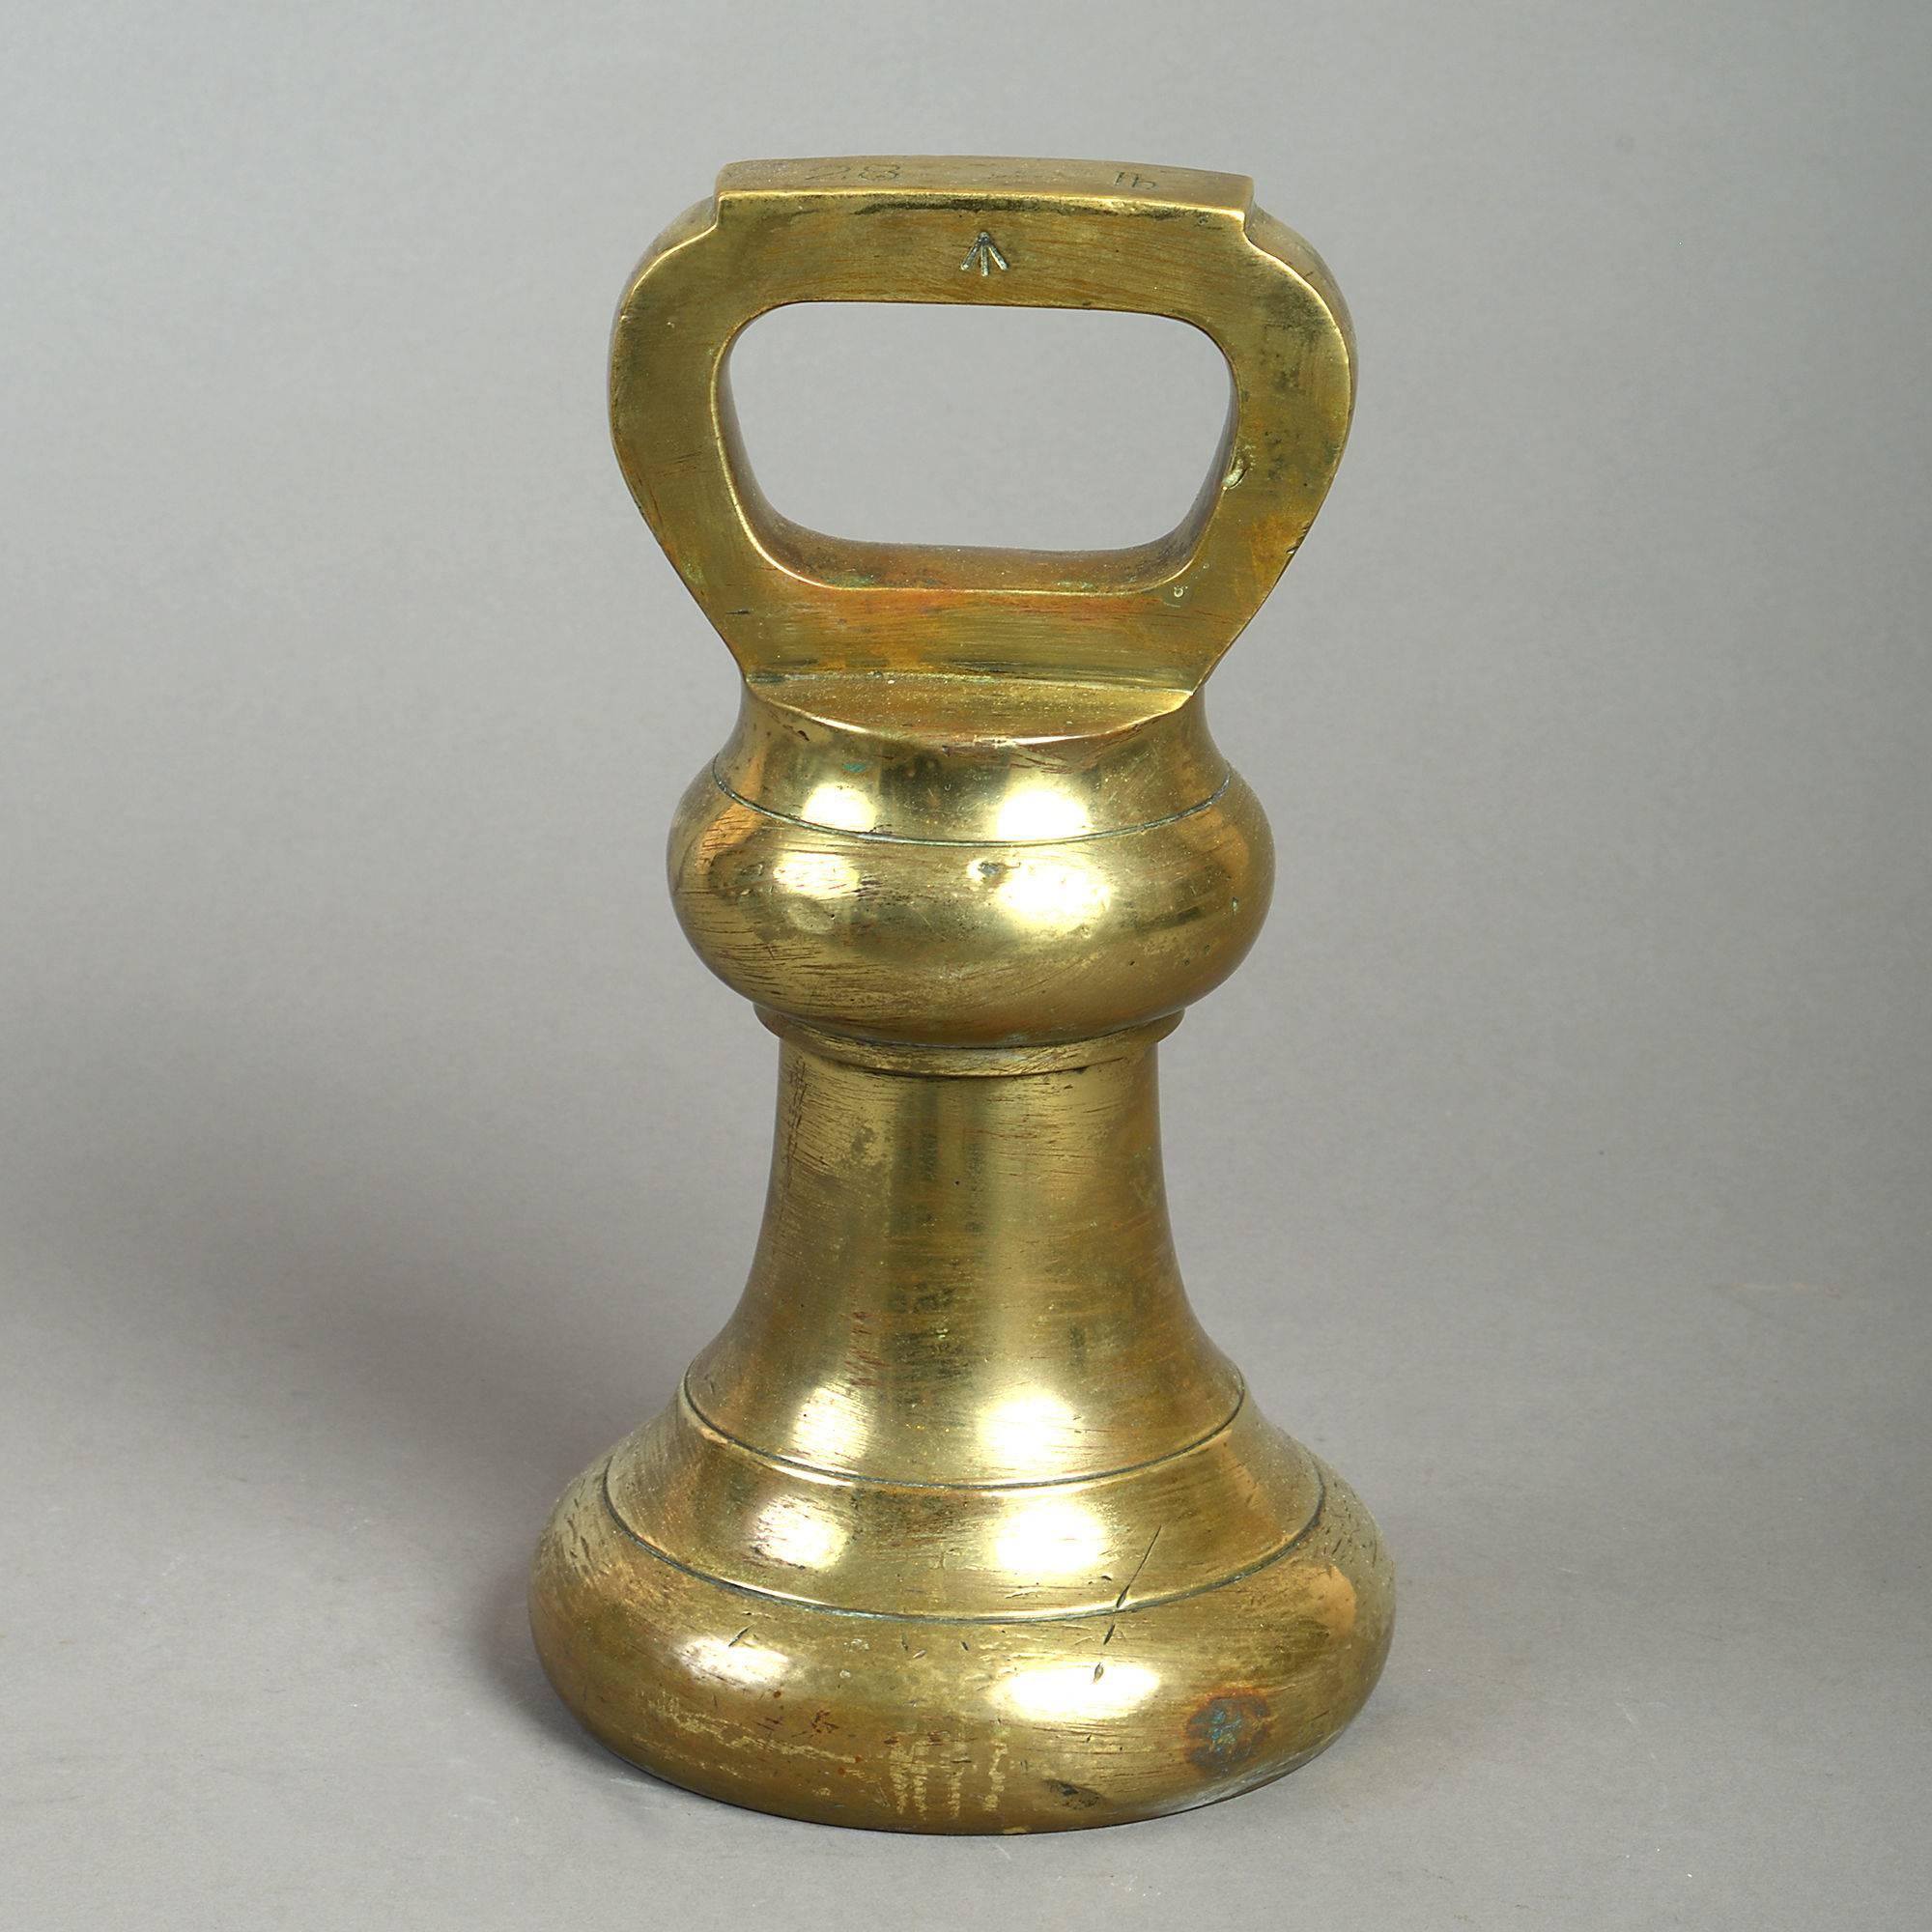 A large mid-19th century brass bell weight, the handle inscribed 28 lb and with a pheon. 

Brass bell weights were produced for official use throughout Great Britain and the British Empire in the 19th century. The inscribed pheon was applied to